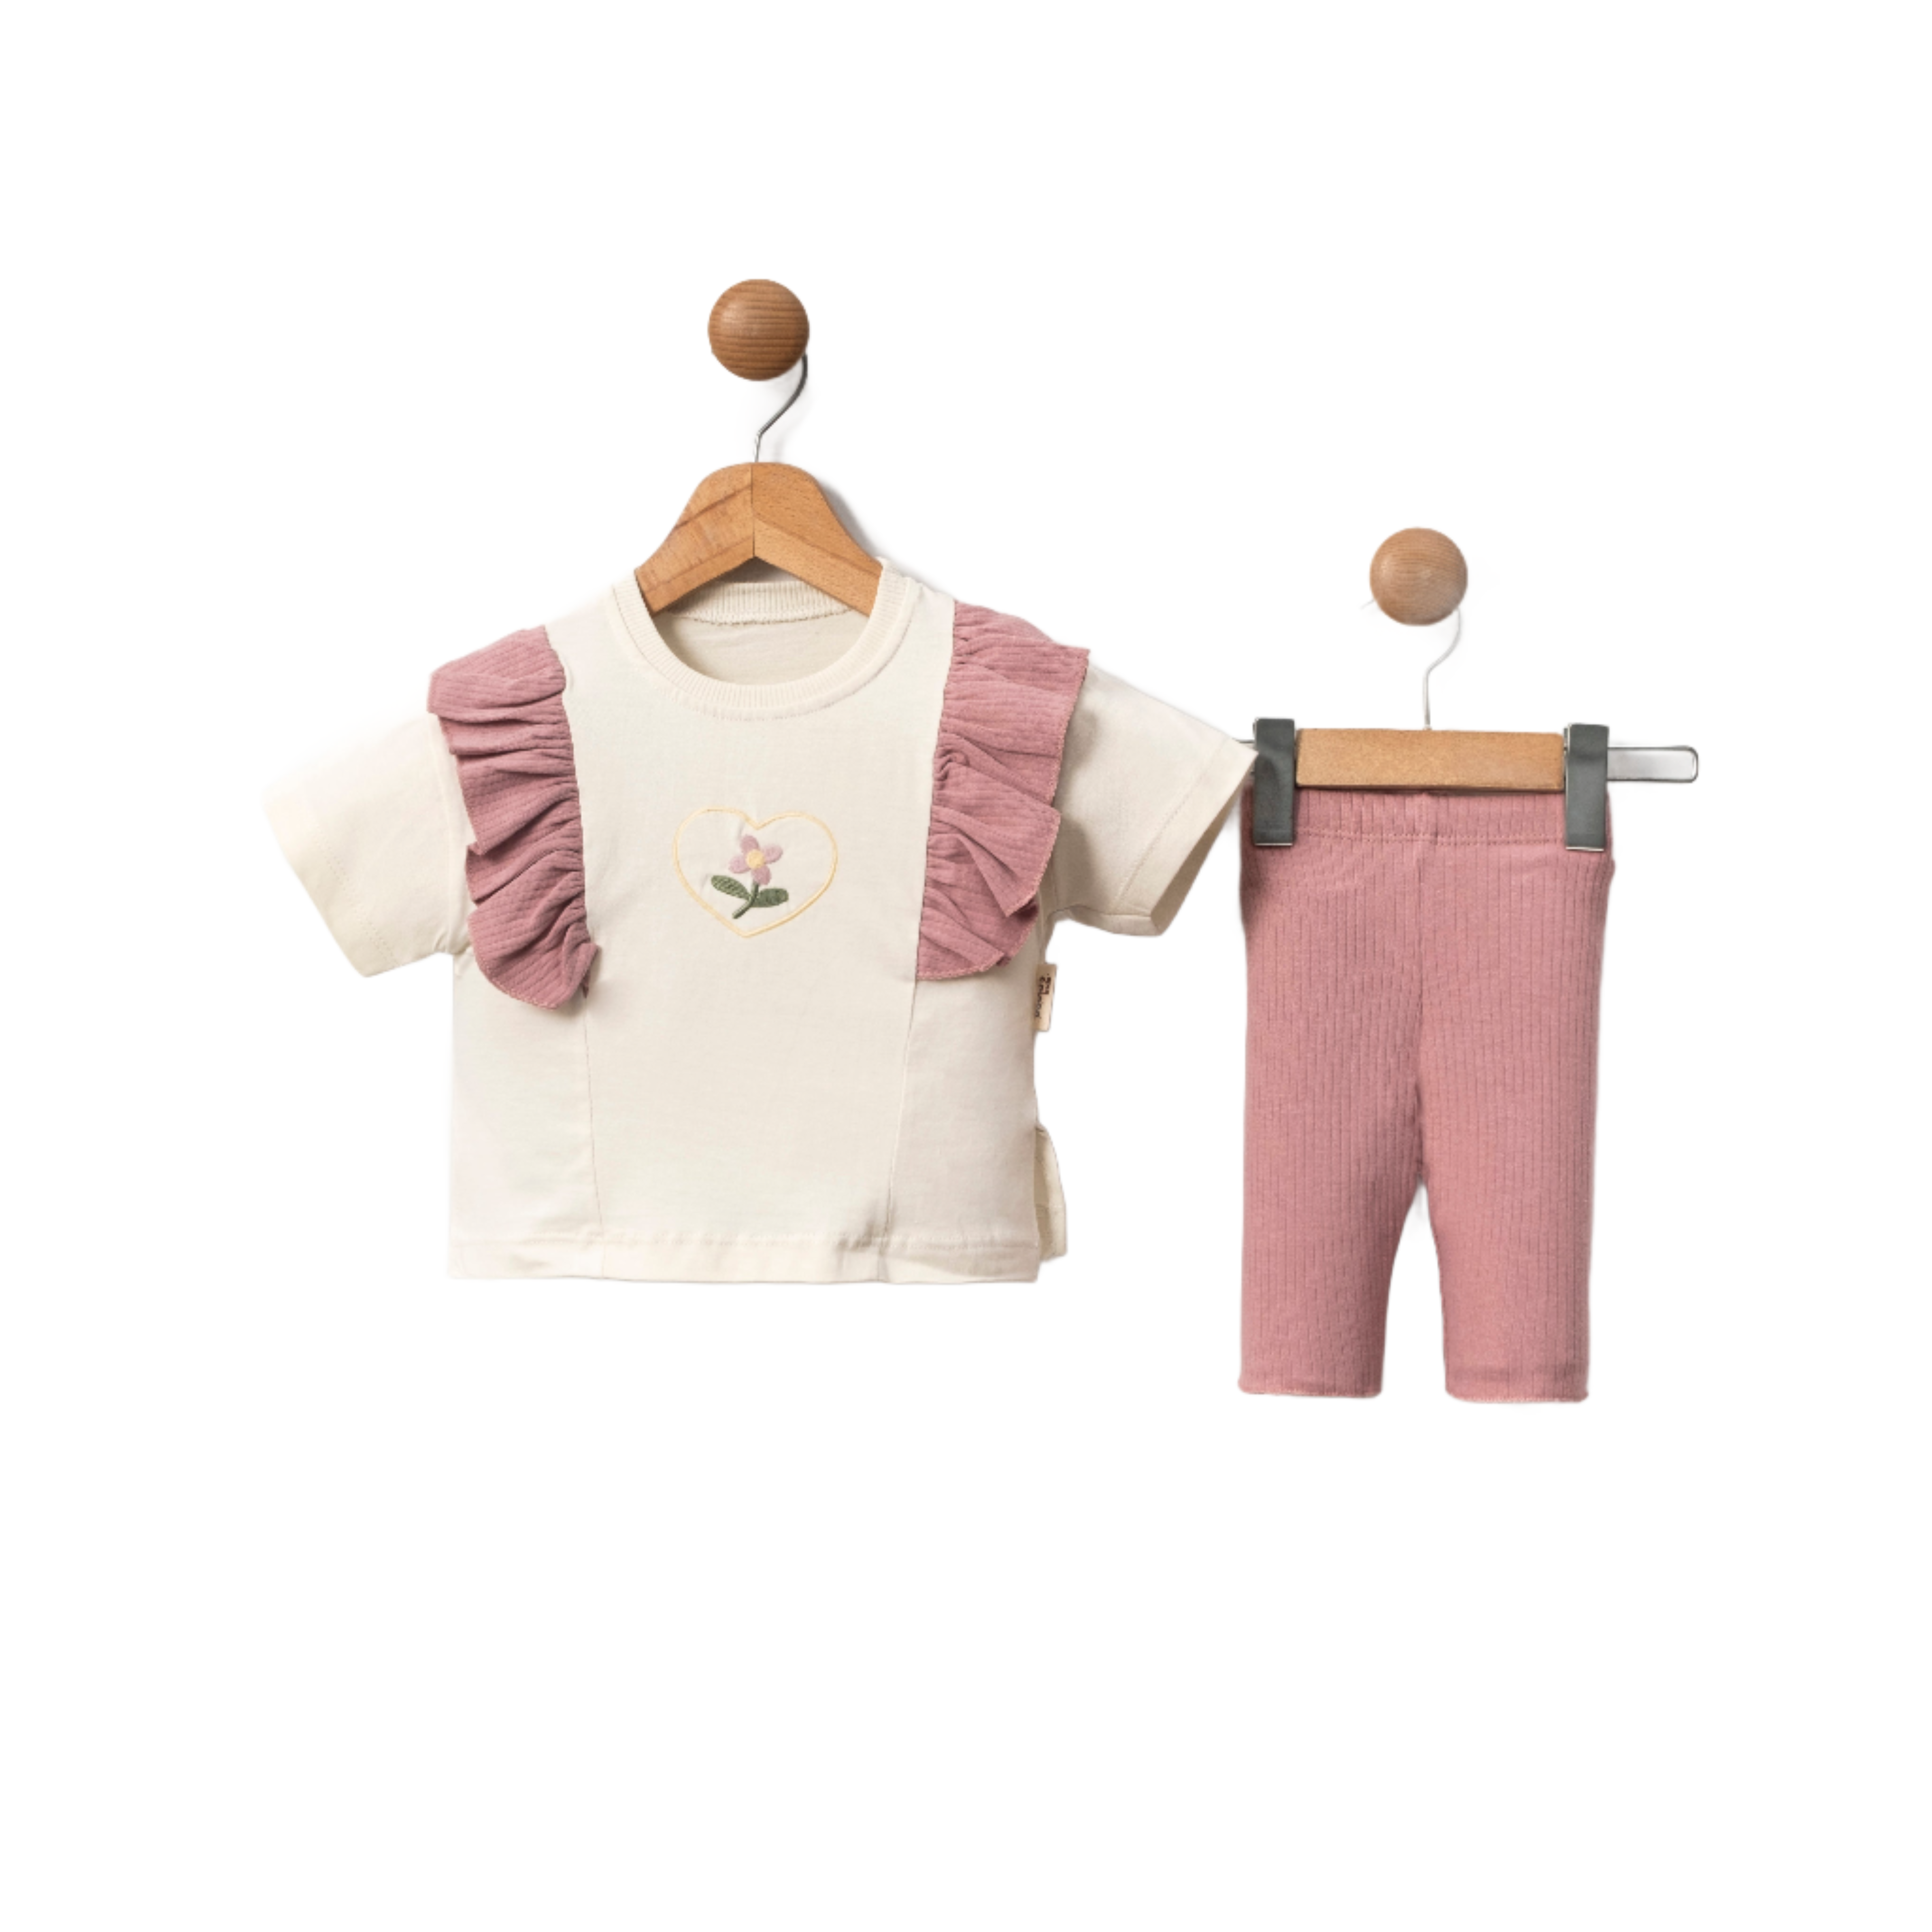 The Blossom Breeze Girls Casual Set